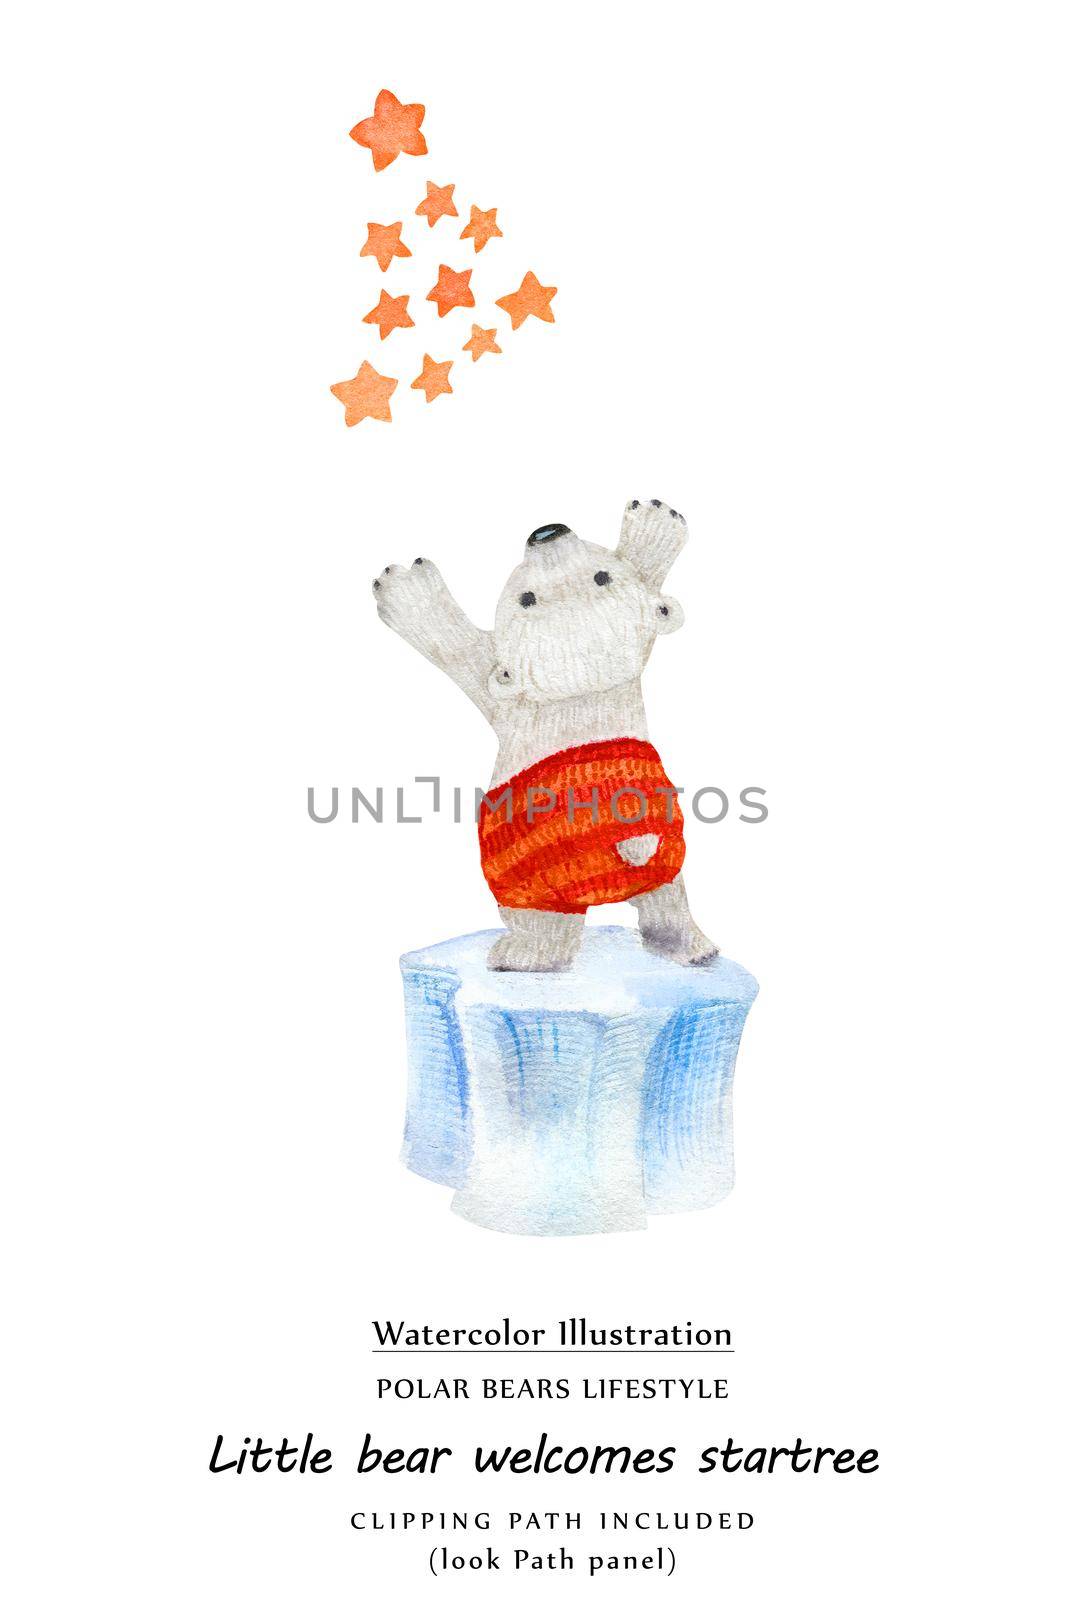 Little bear welcomes X-mas Tree constellation, watercolor by Xeniasnowstorm